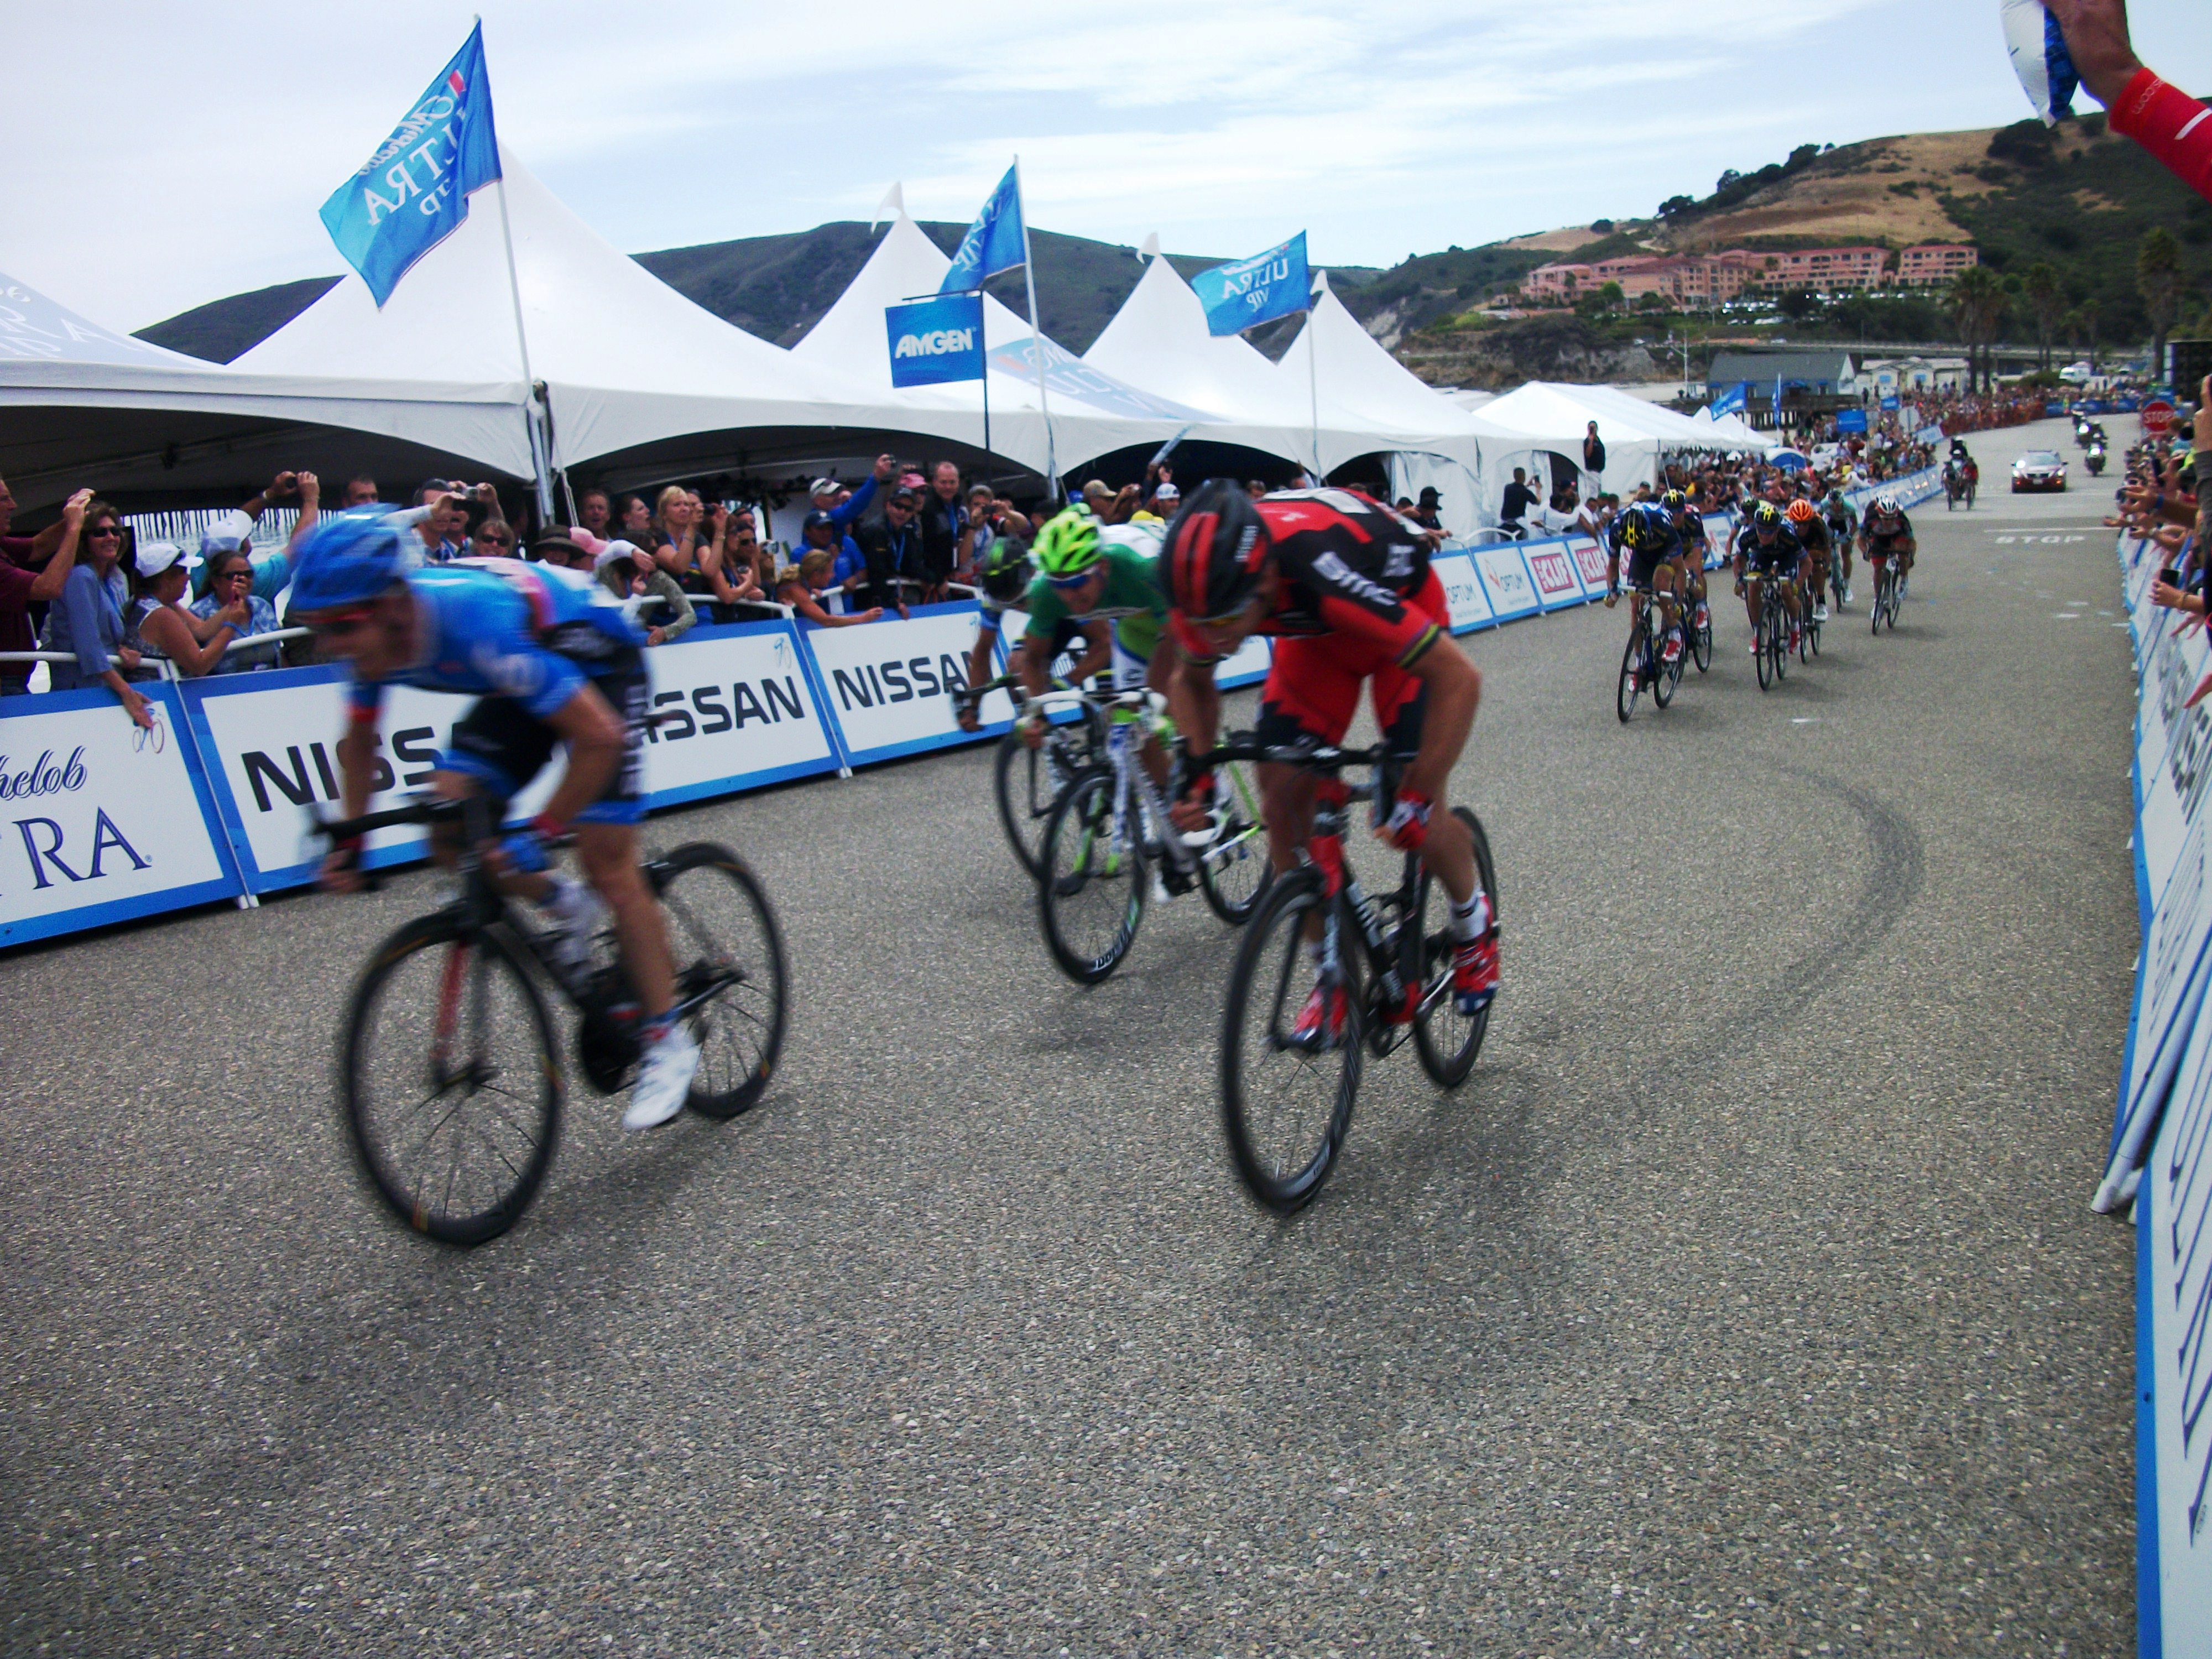 Tyler FARRAR and Thor HUSHOVD sprinting for second and third place